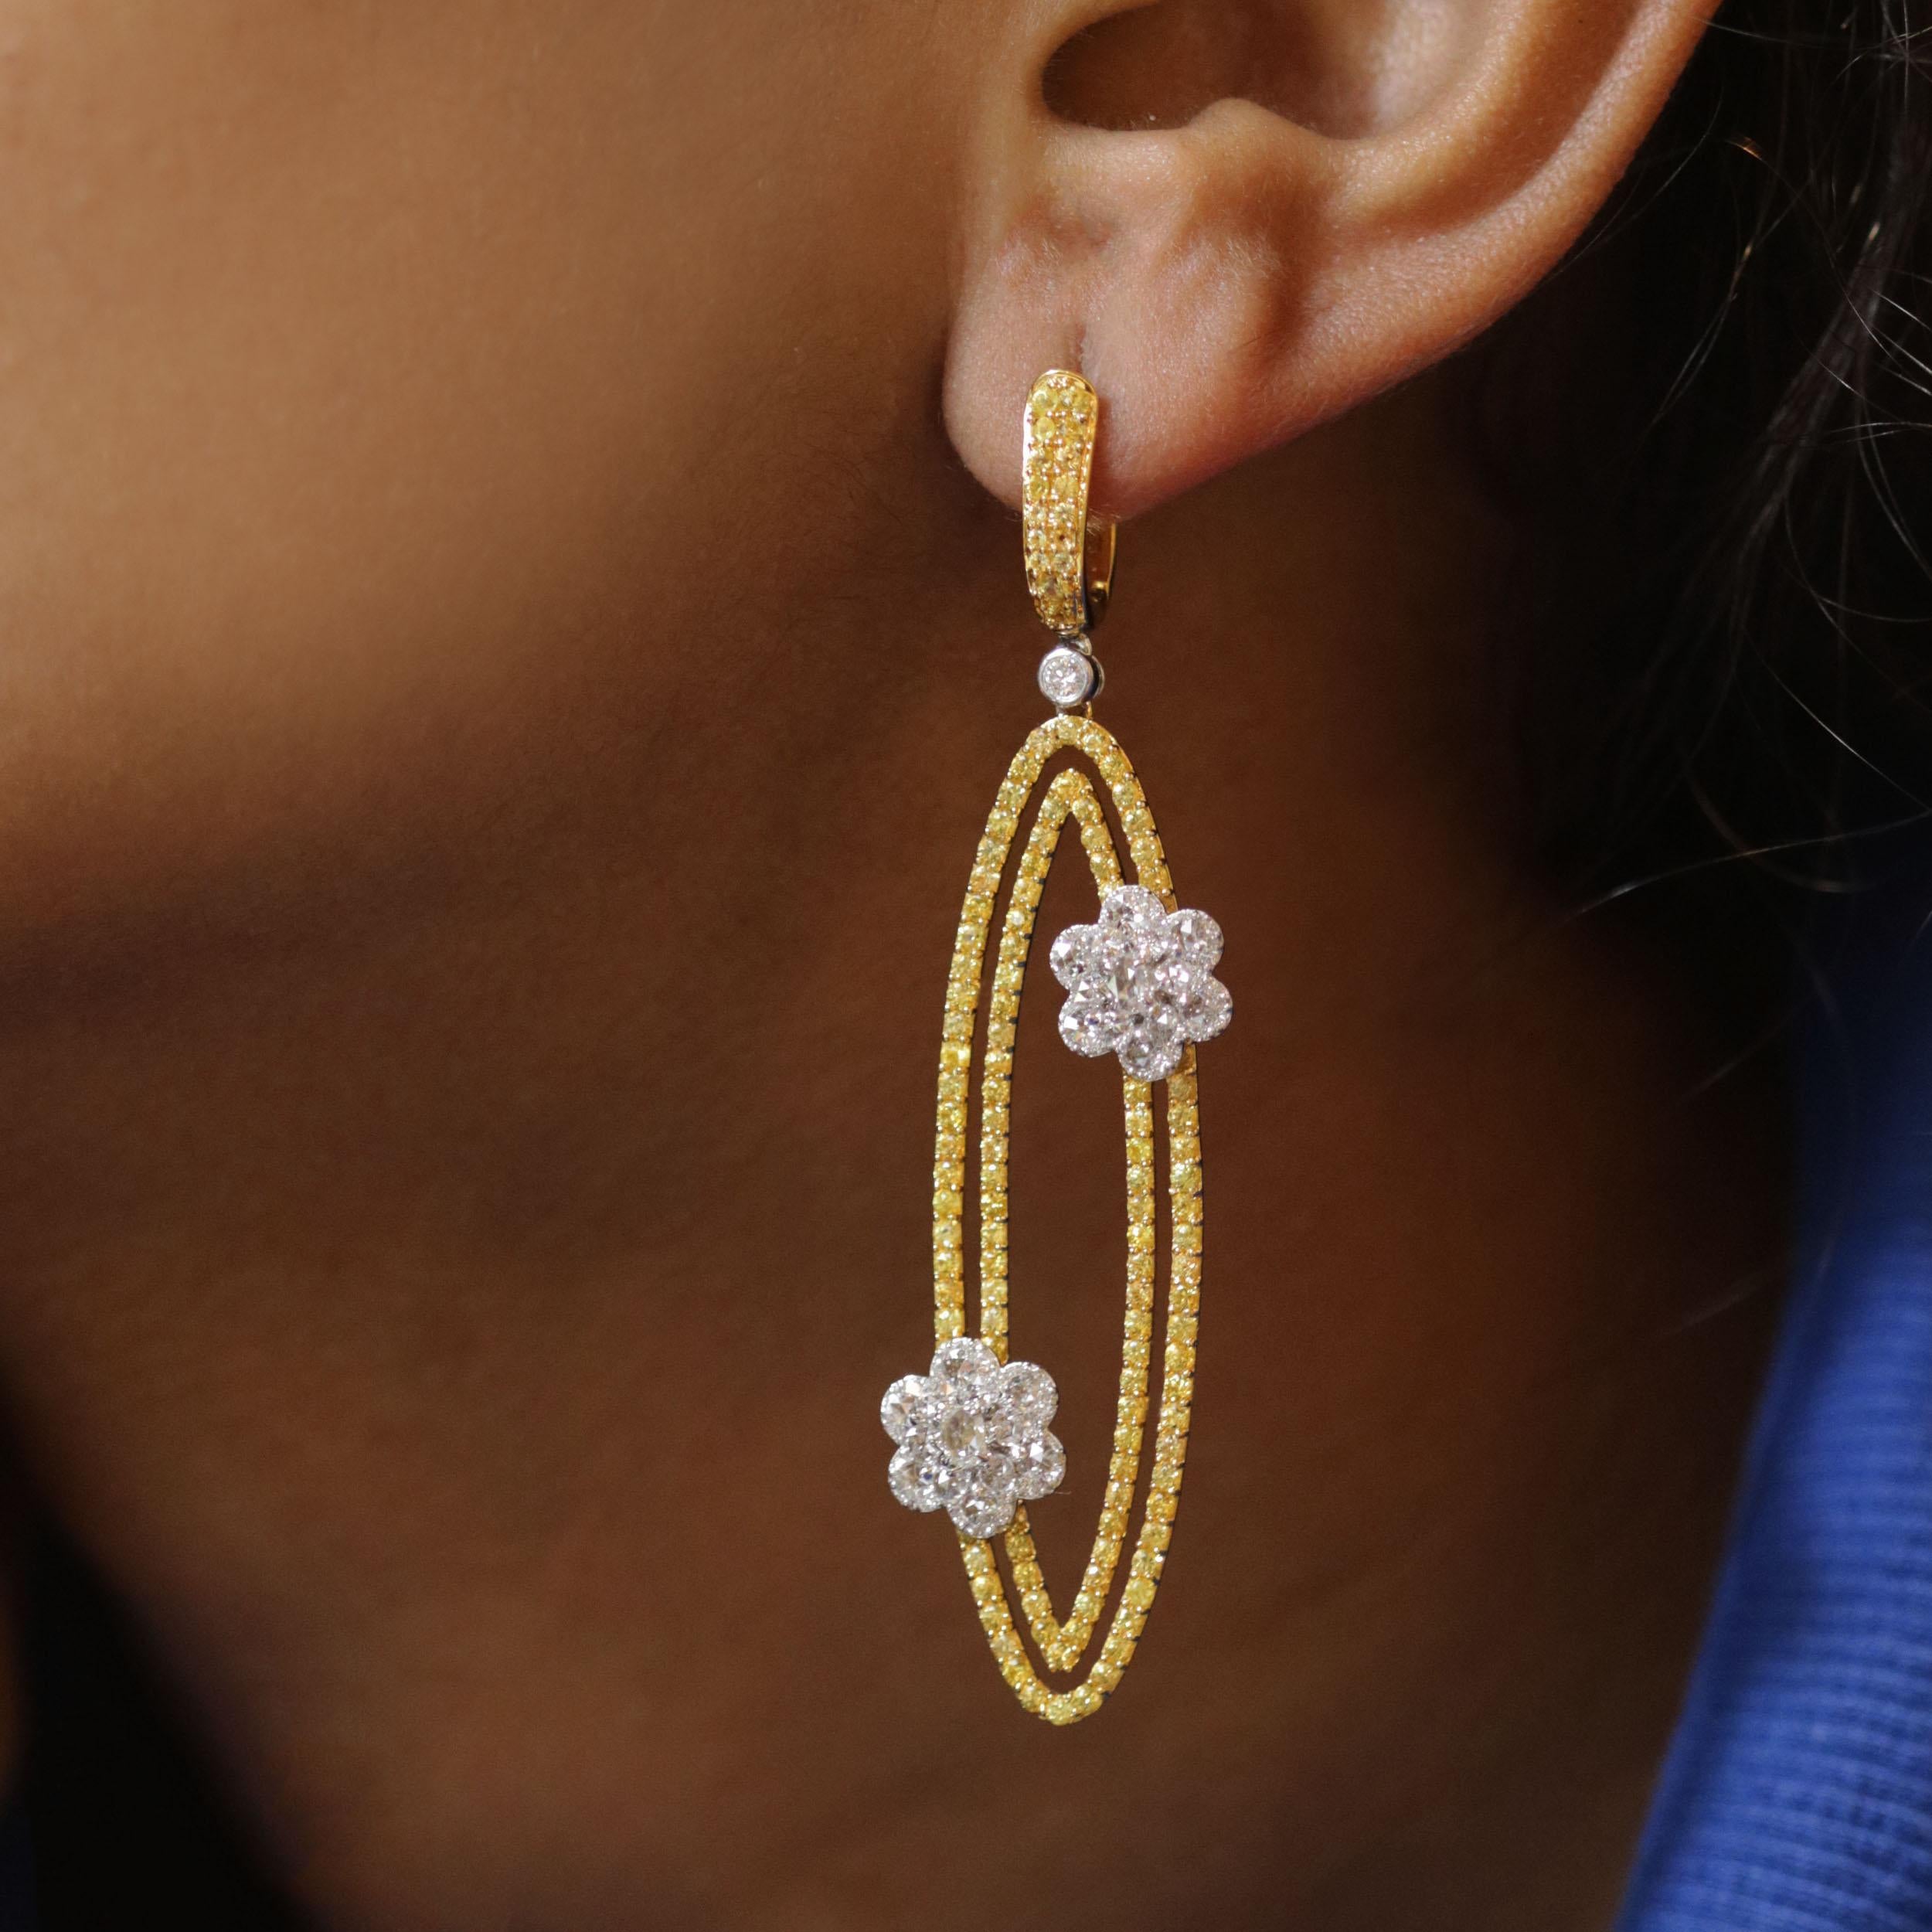 Gross Weight: 20.11 Grams
Diamond Weight: 1.95 cts
Yellow Sapphire Weight: 5.02 cts
IGI Certified: Summary No: 29J388971810

Video of the product can be shared on request.

Geometry and nature inspirations come together in these earrings that are